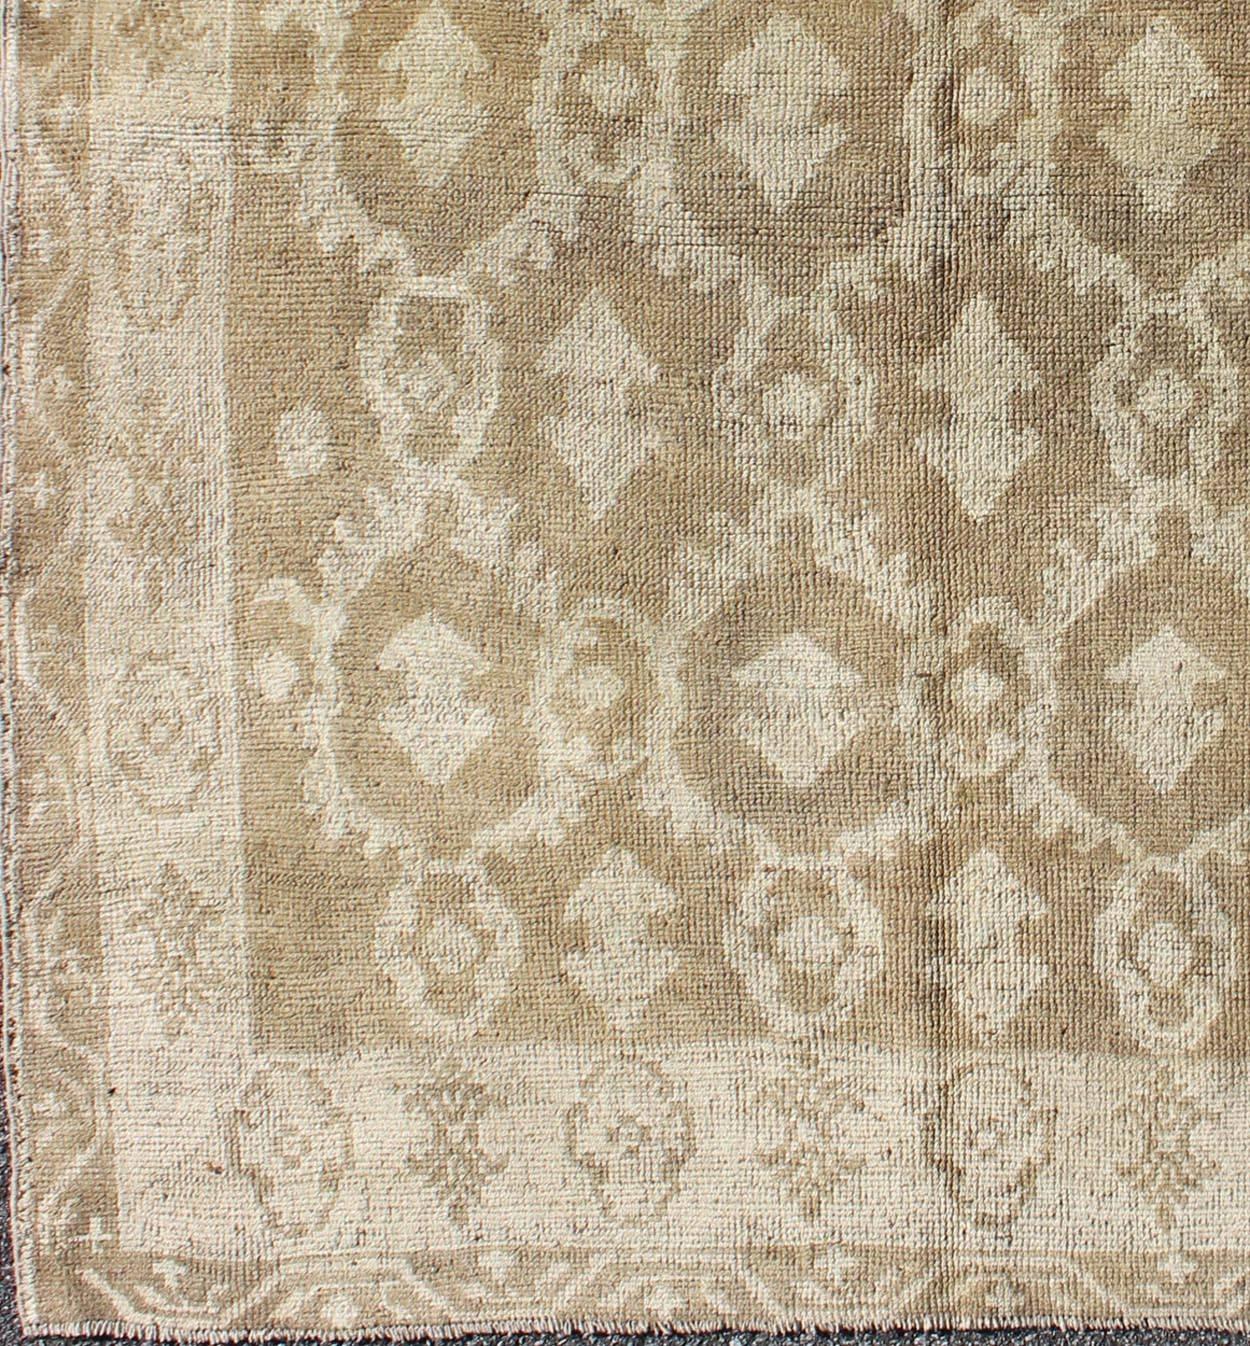 Squared Size Cross-latch / latticework Turkish Oushak rug vintage in taupe and cream, rug en-628, country of origin / type: Turkey / Tulu, circa 1940

Set on a taupe-colored field with an all-over cream pattern, this beautiful midcentury Turkish rug